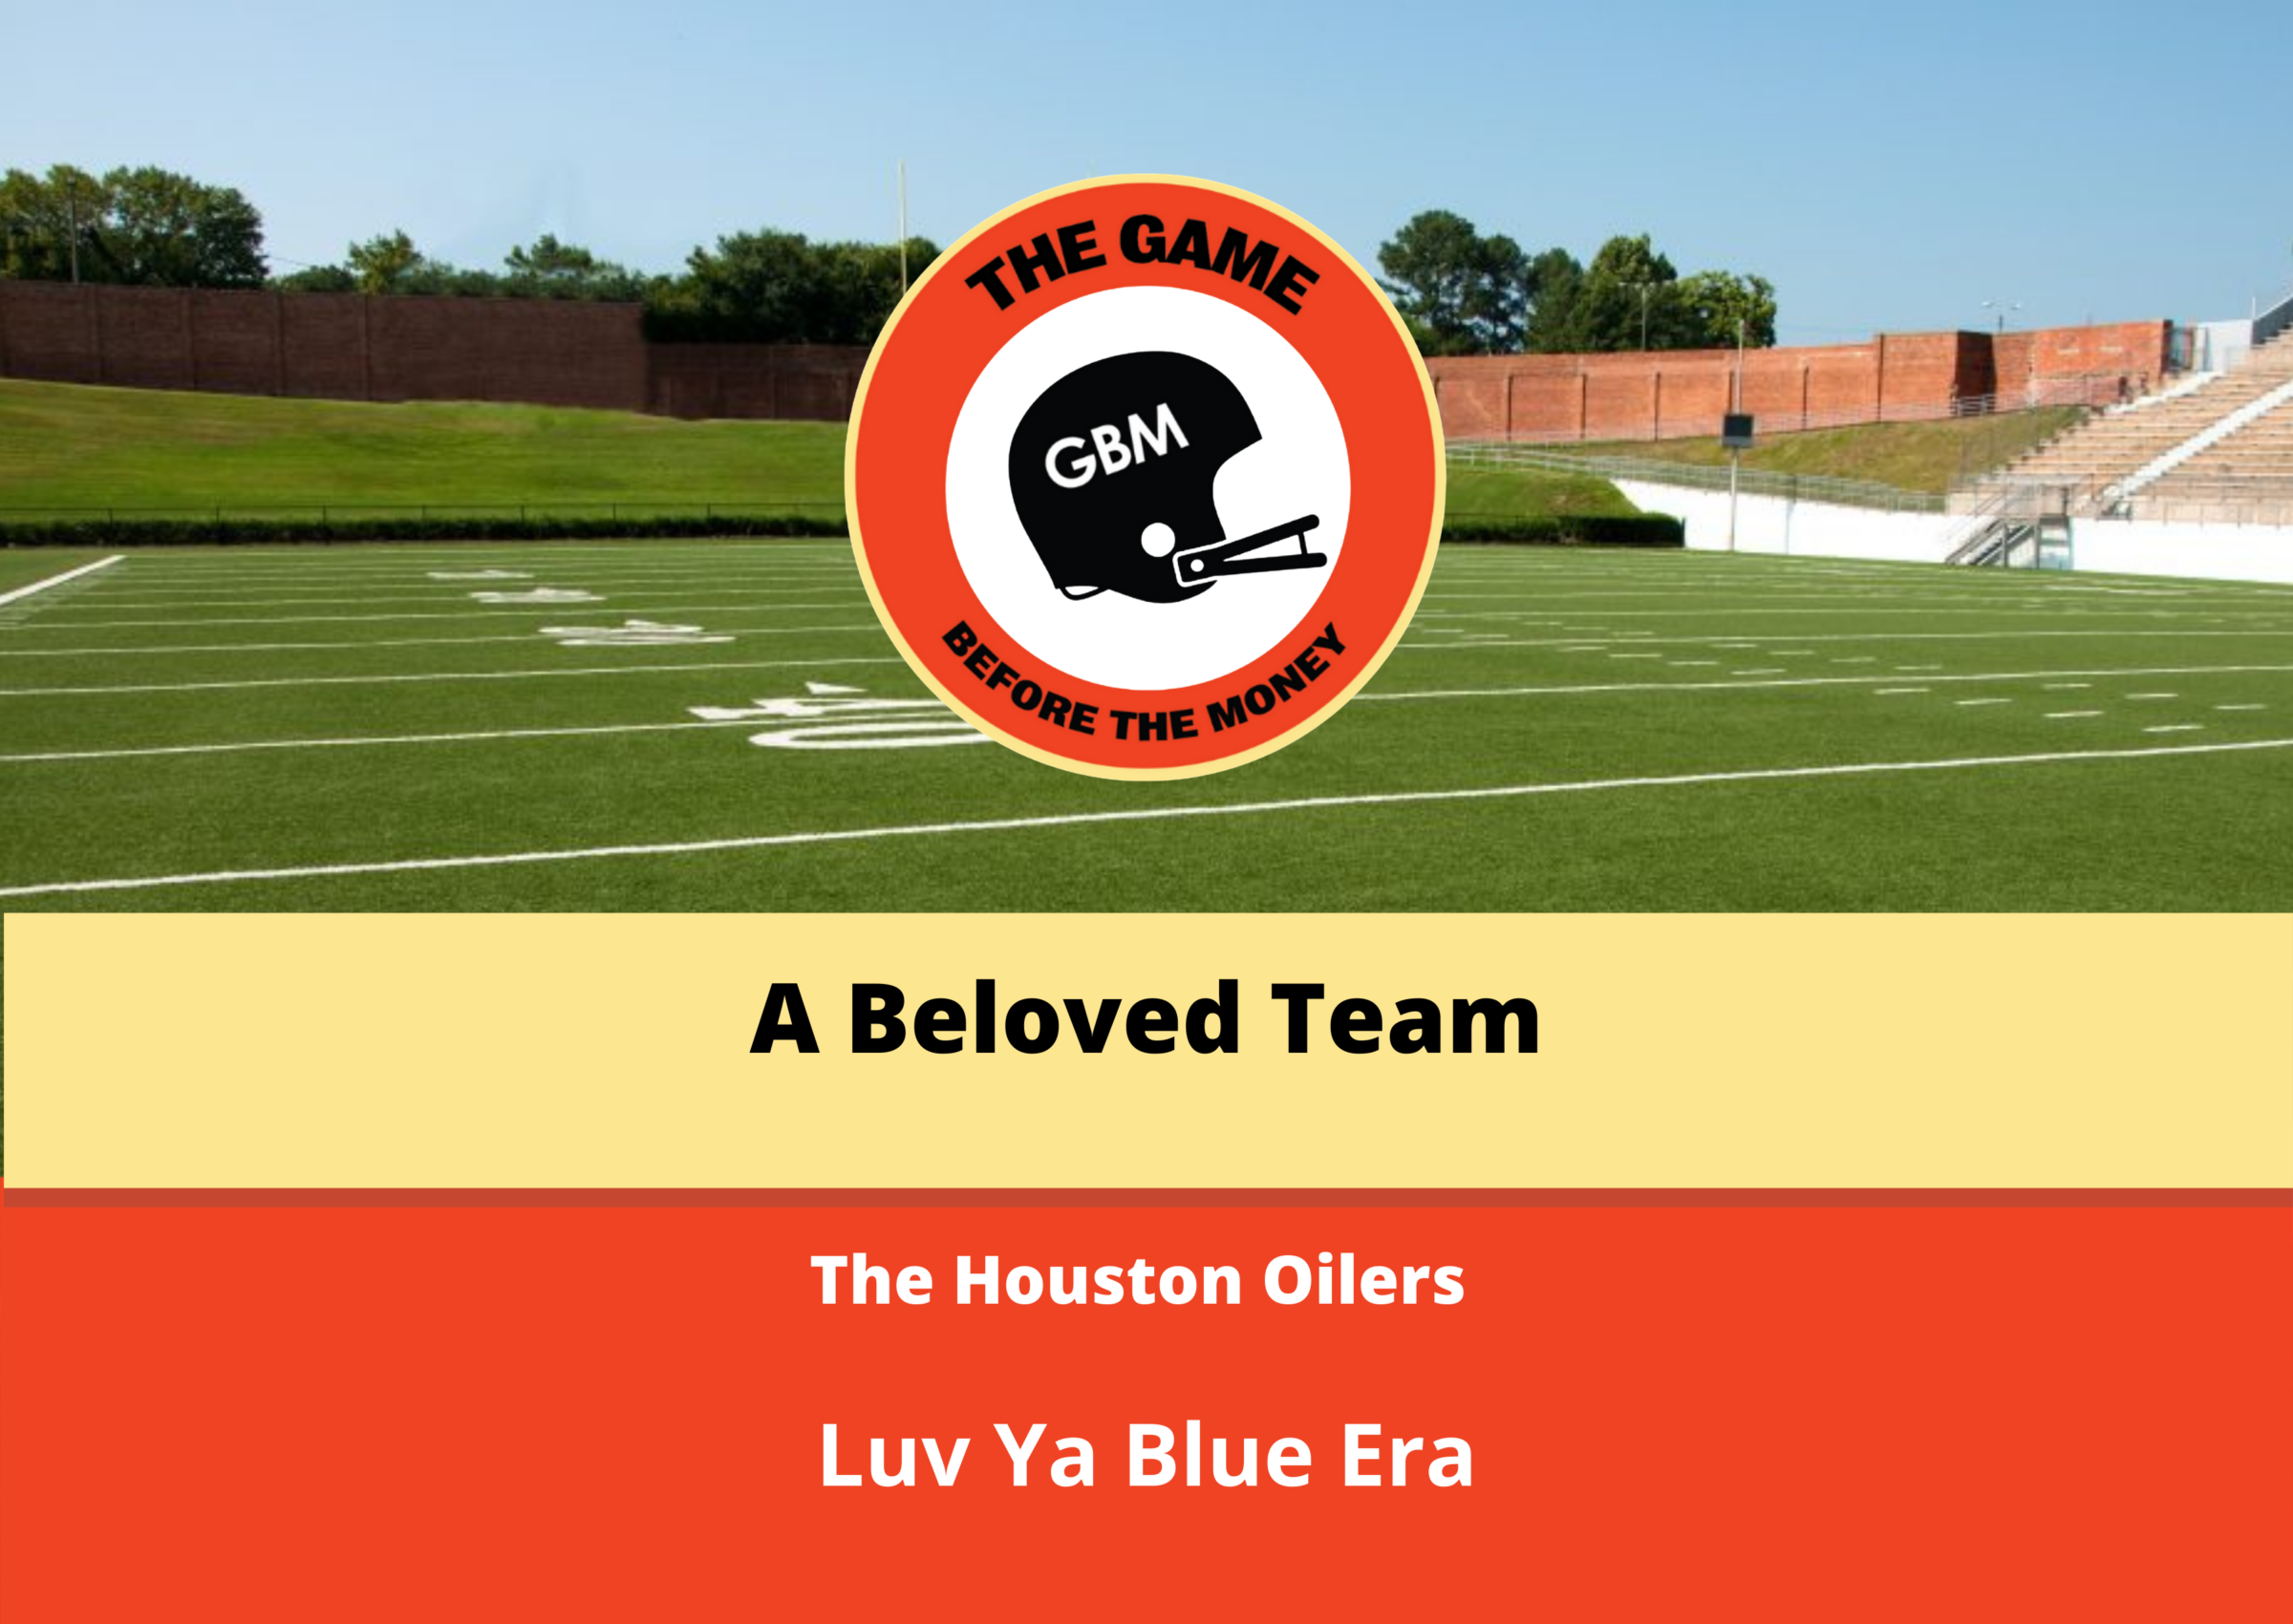 So if you liked the Oilers - Houston Oilers Luv Ya Blue